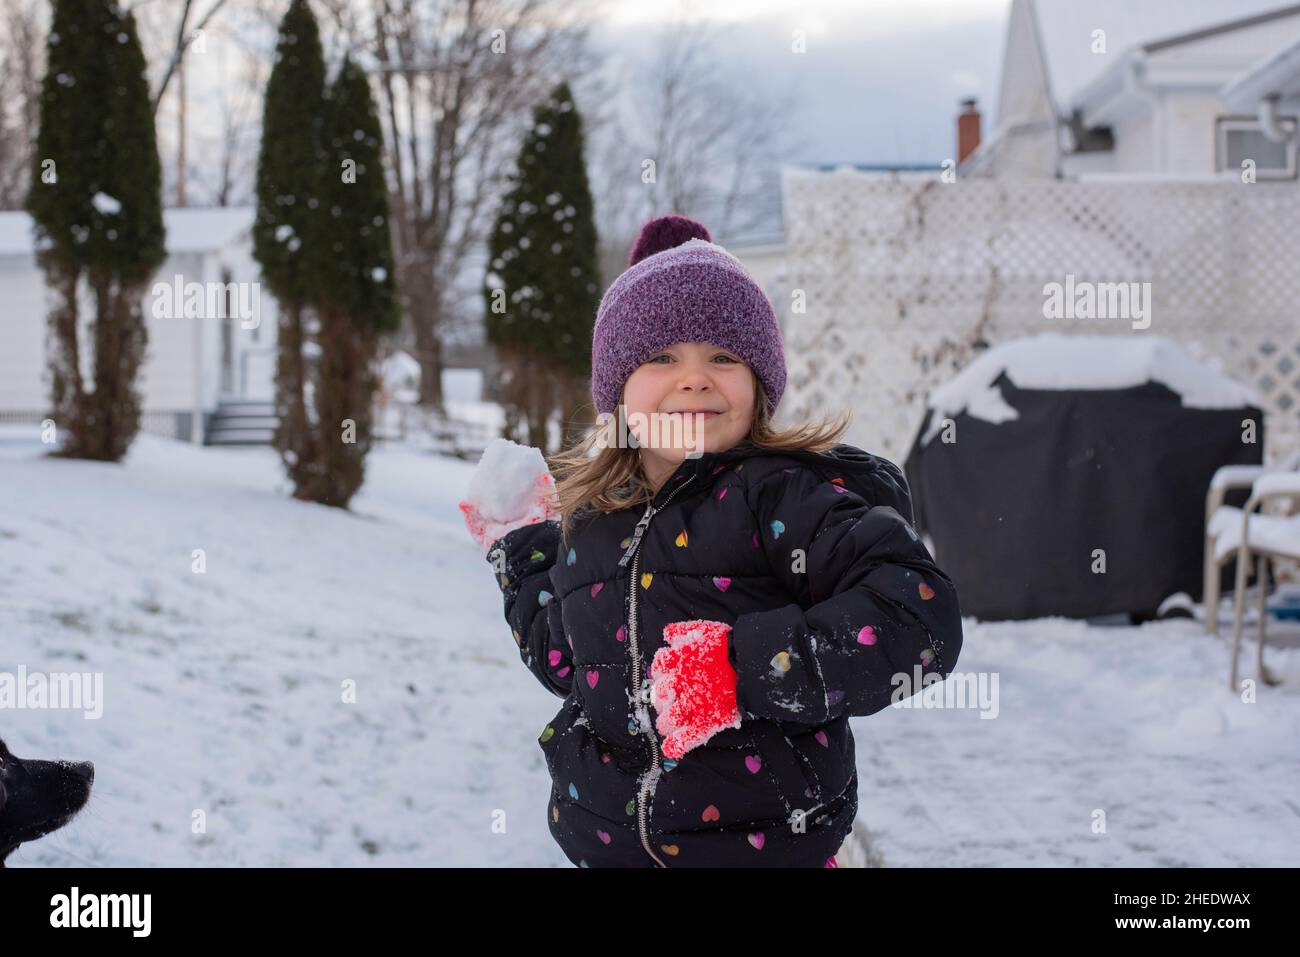 A young child throws a snowball toward the camera during winter. Stock Photo